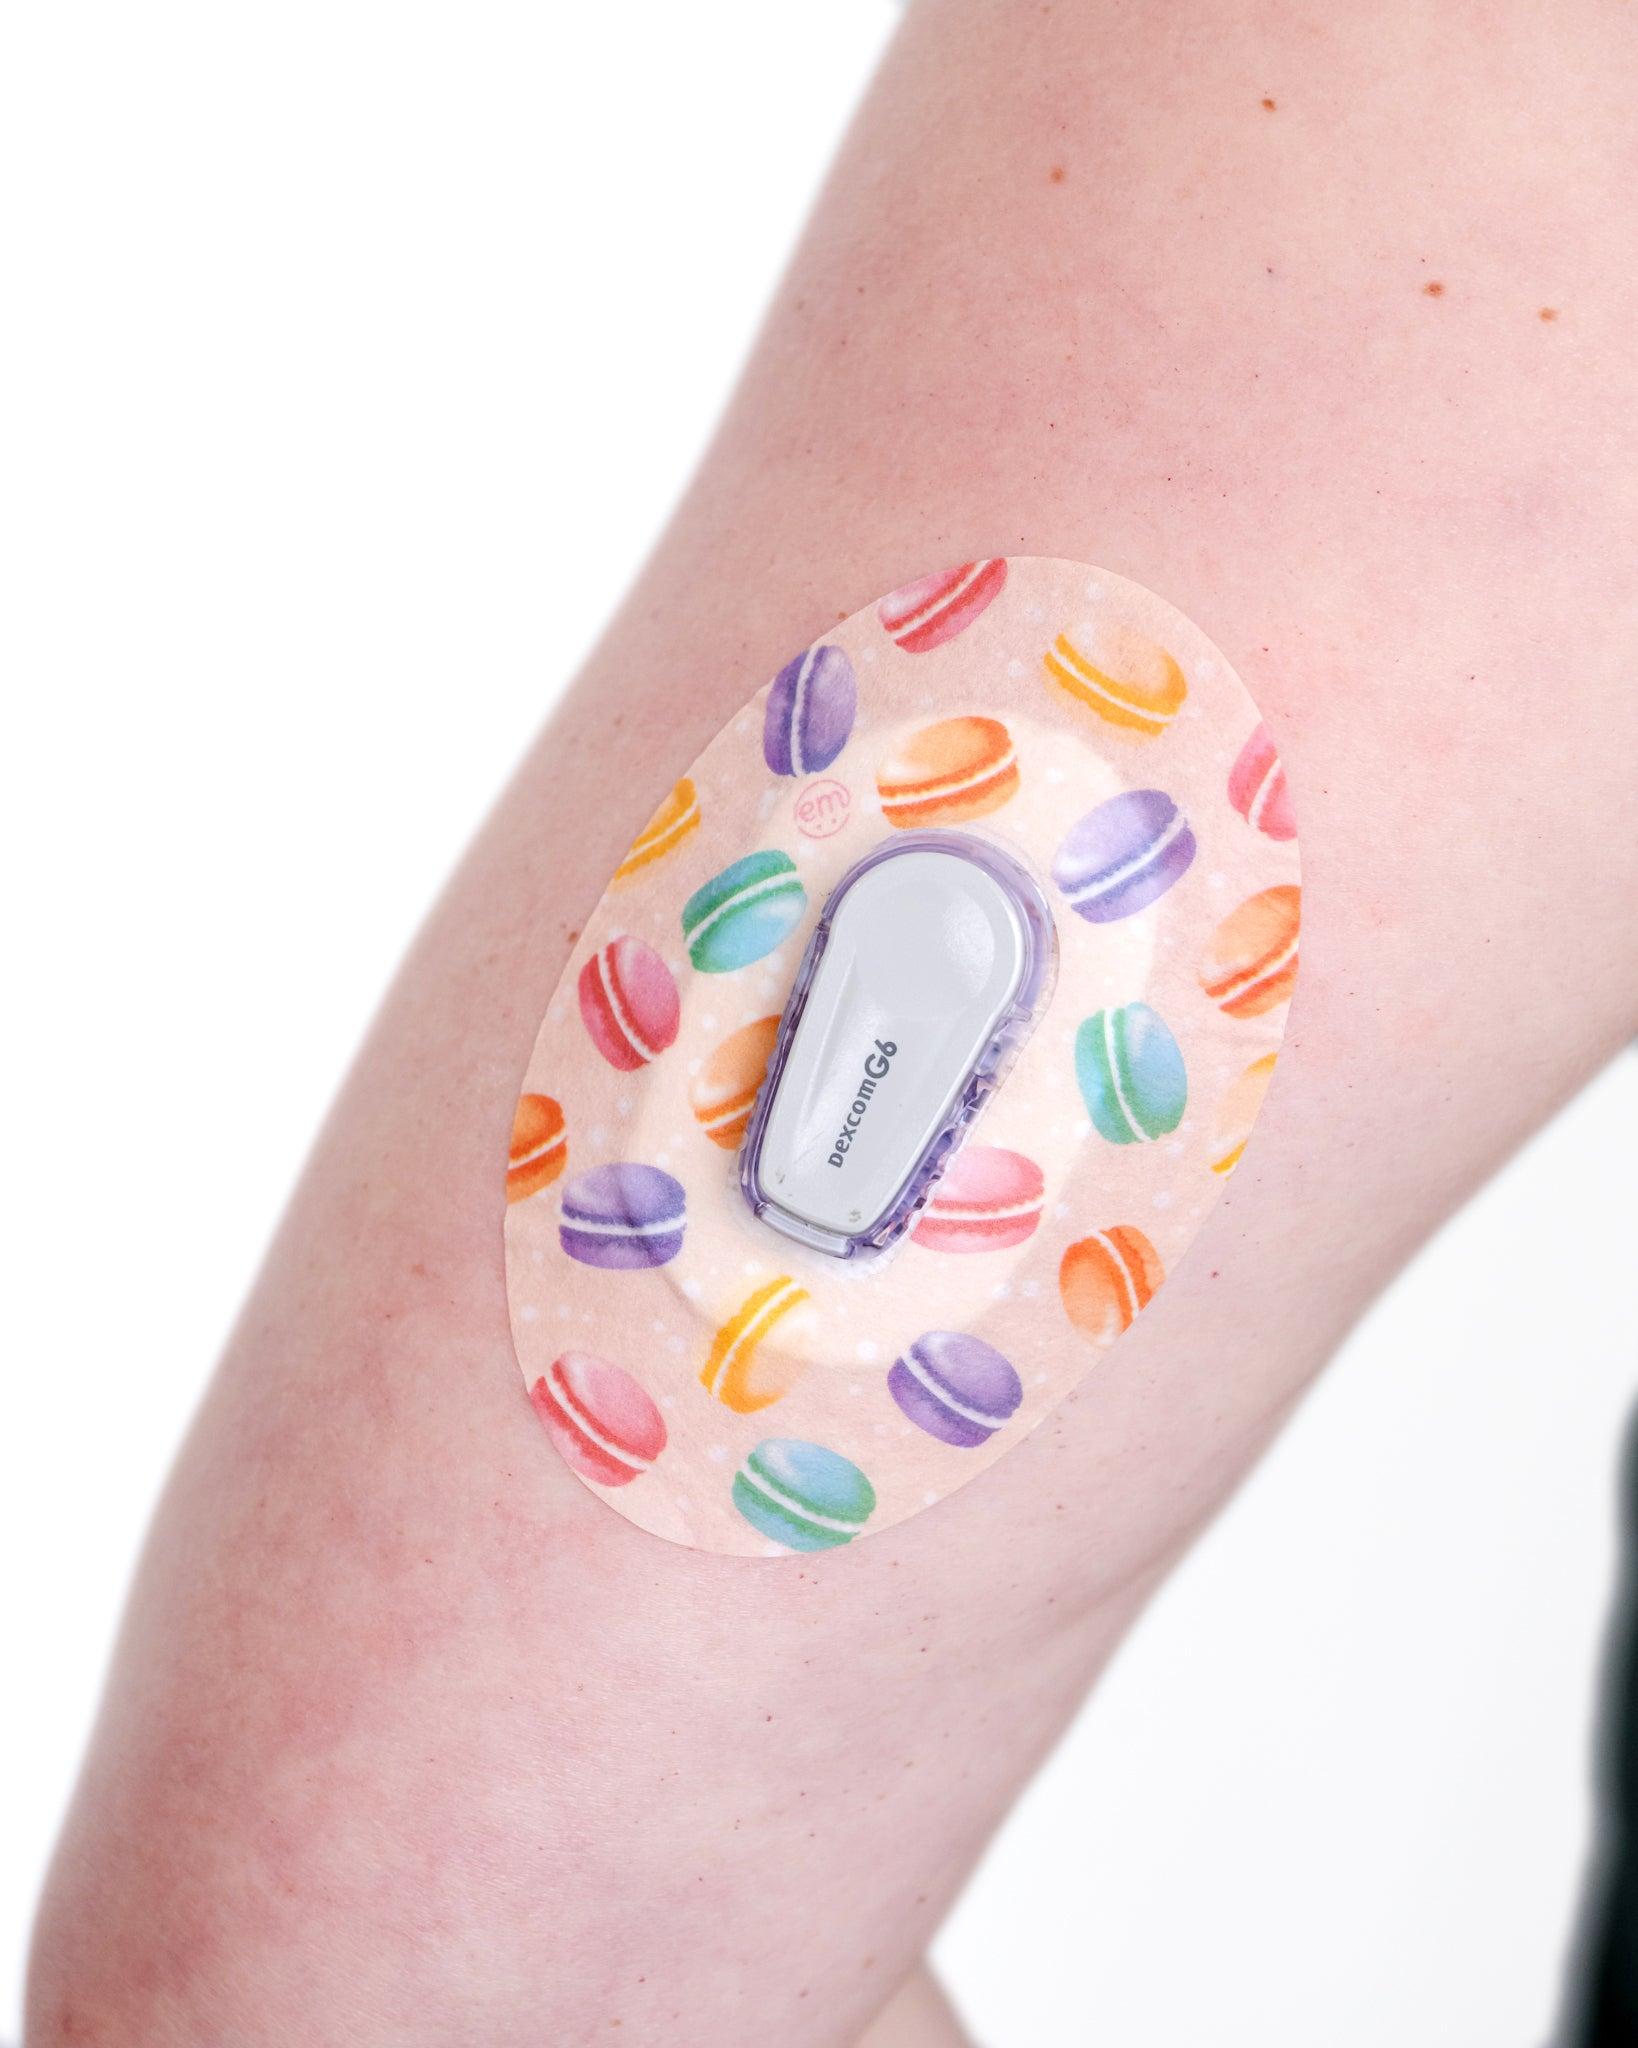 ExpressionMed Macarons Dexcom G6 Tape in use on arm